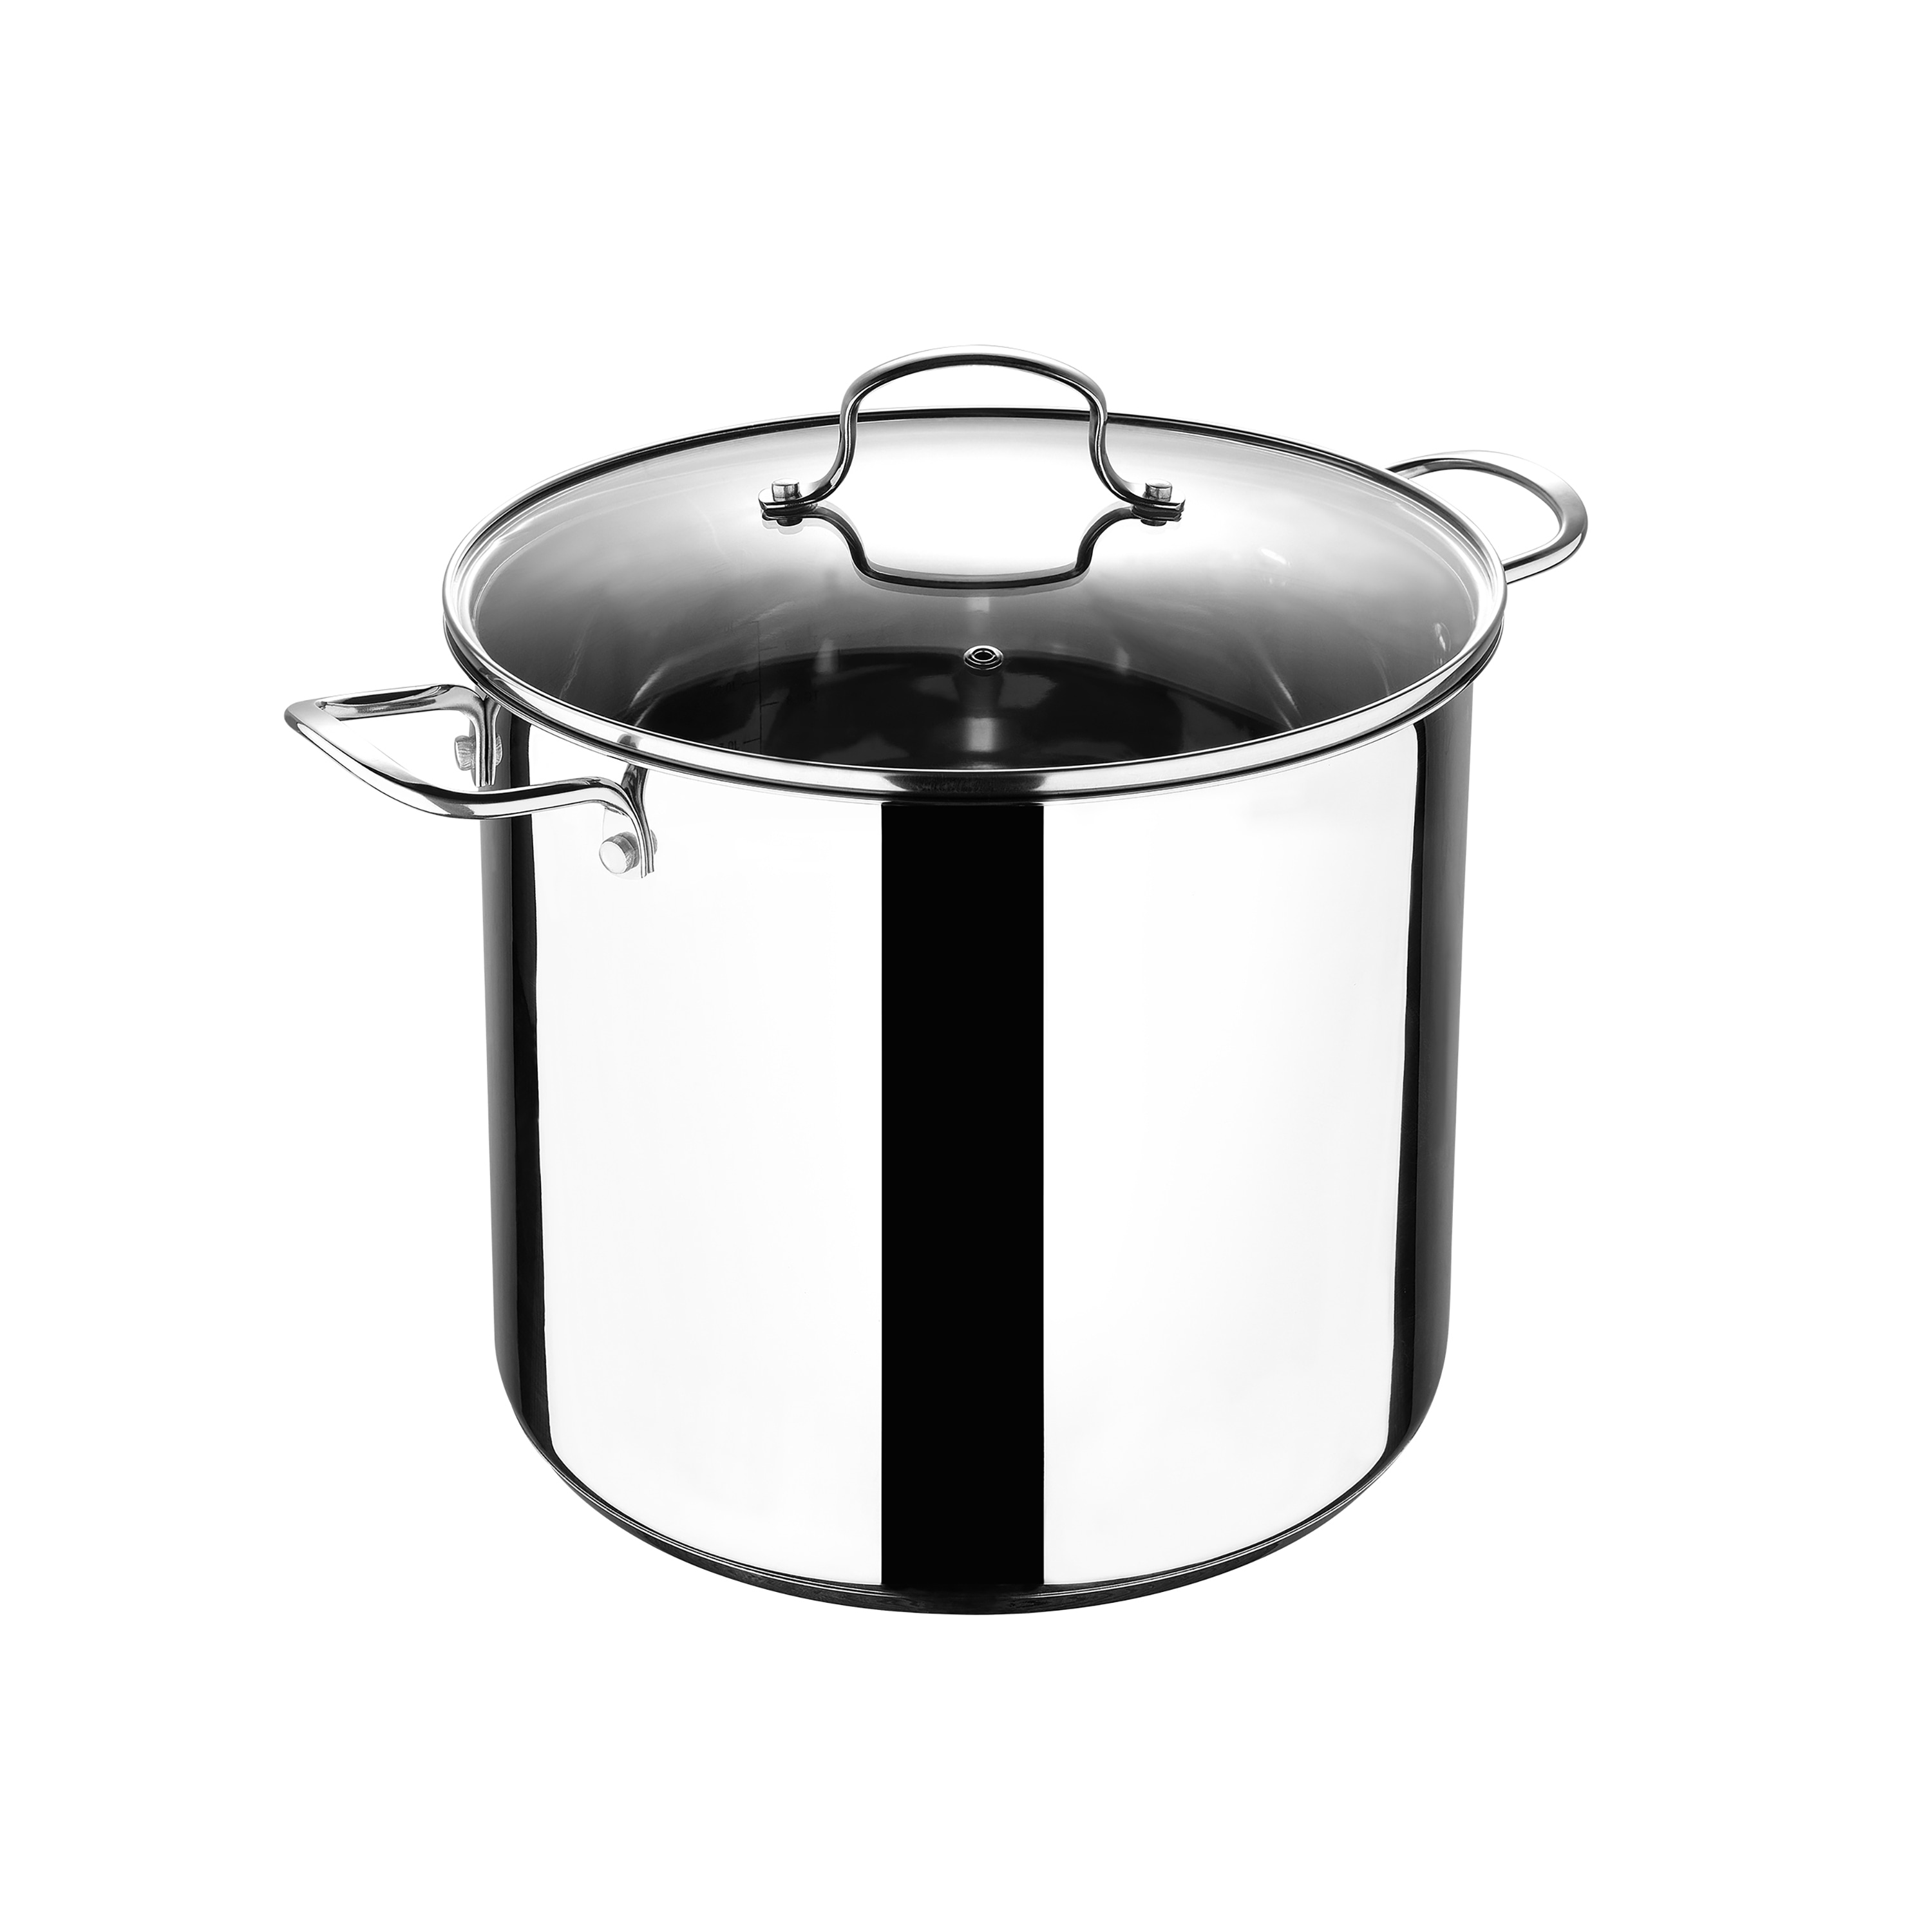 https://ak1.ostkcdn.com/images/products/is/images/direct/4905a80d7aa1fdf0a261efe1f6ea24a7a9b36b45/Bergner-Essentials-BGUS10125STS-Stainless-Steel-Stock-Pot-with-Tempered-Glass-Lid-12-Quart-Pot.jpg